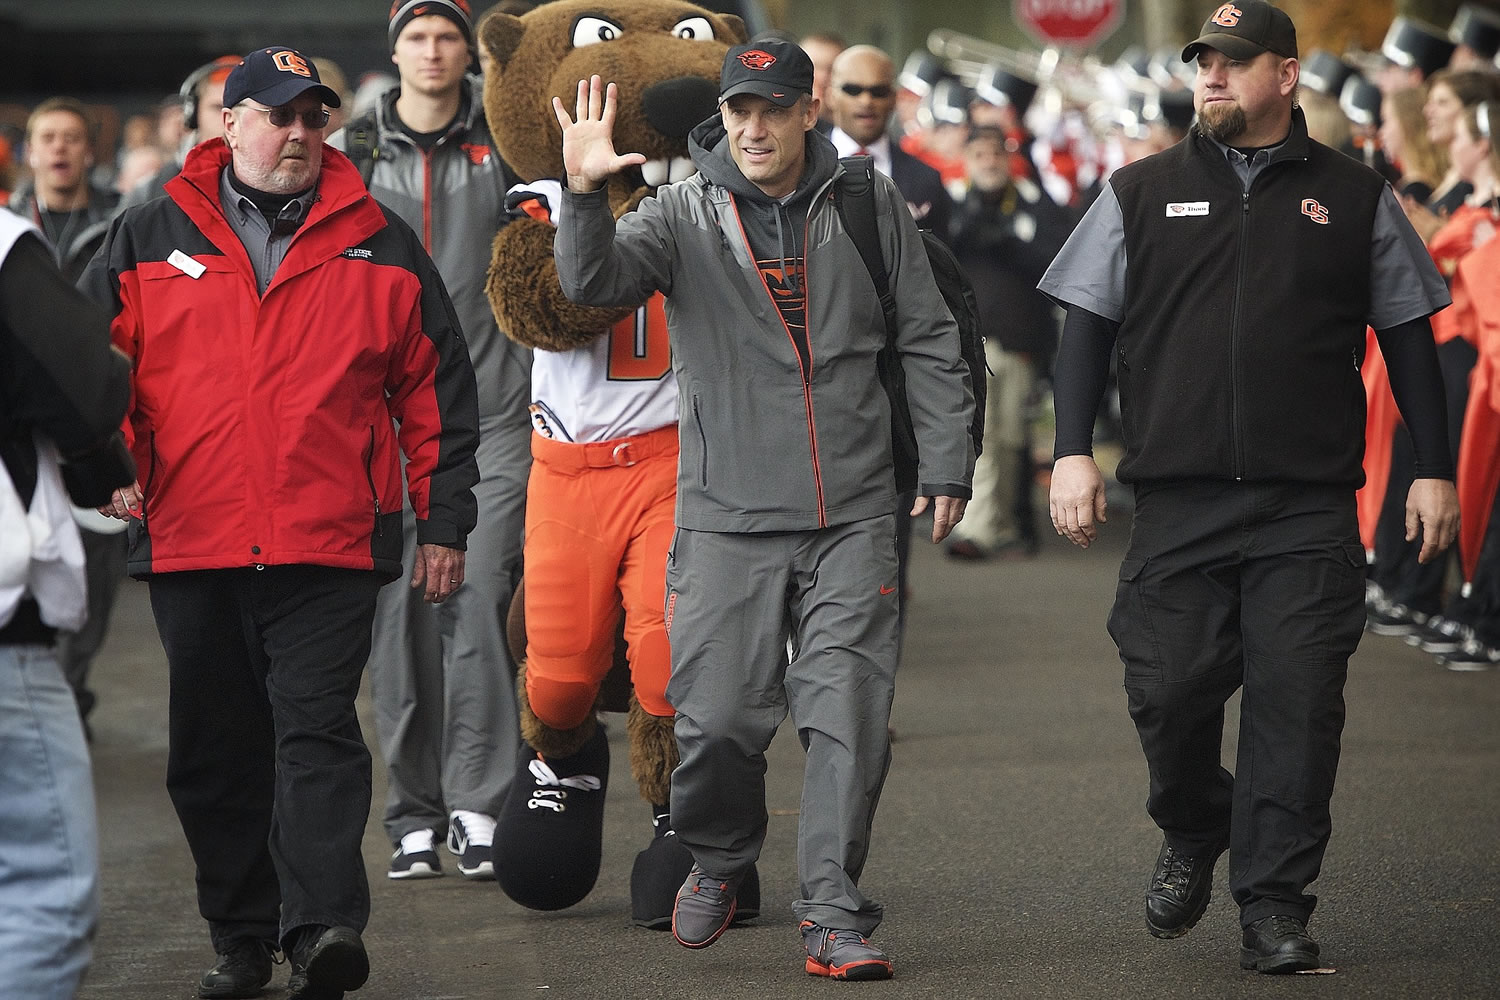 Oregon State football coach Mike Riley waves to fans as the Beavers arrive at Reser Stadium before Saturday's Civil War Game against Oregon.